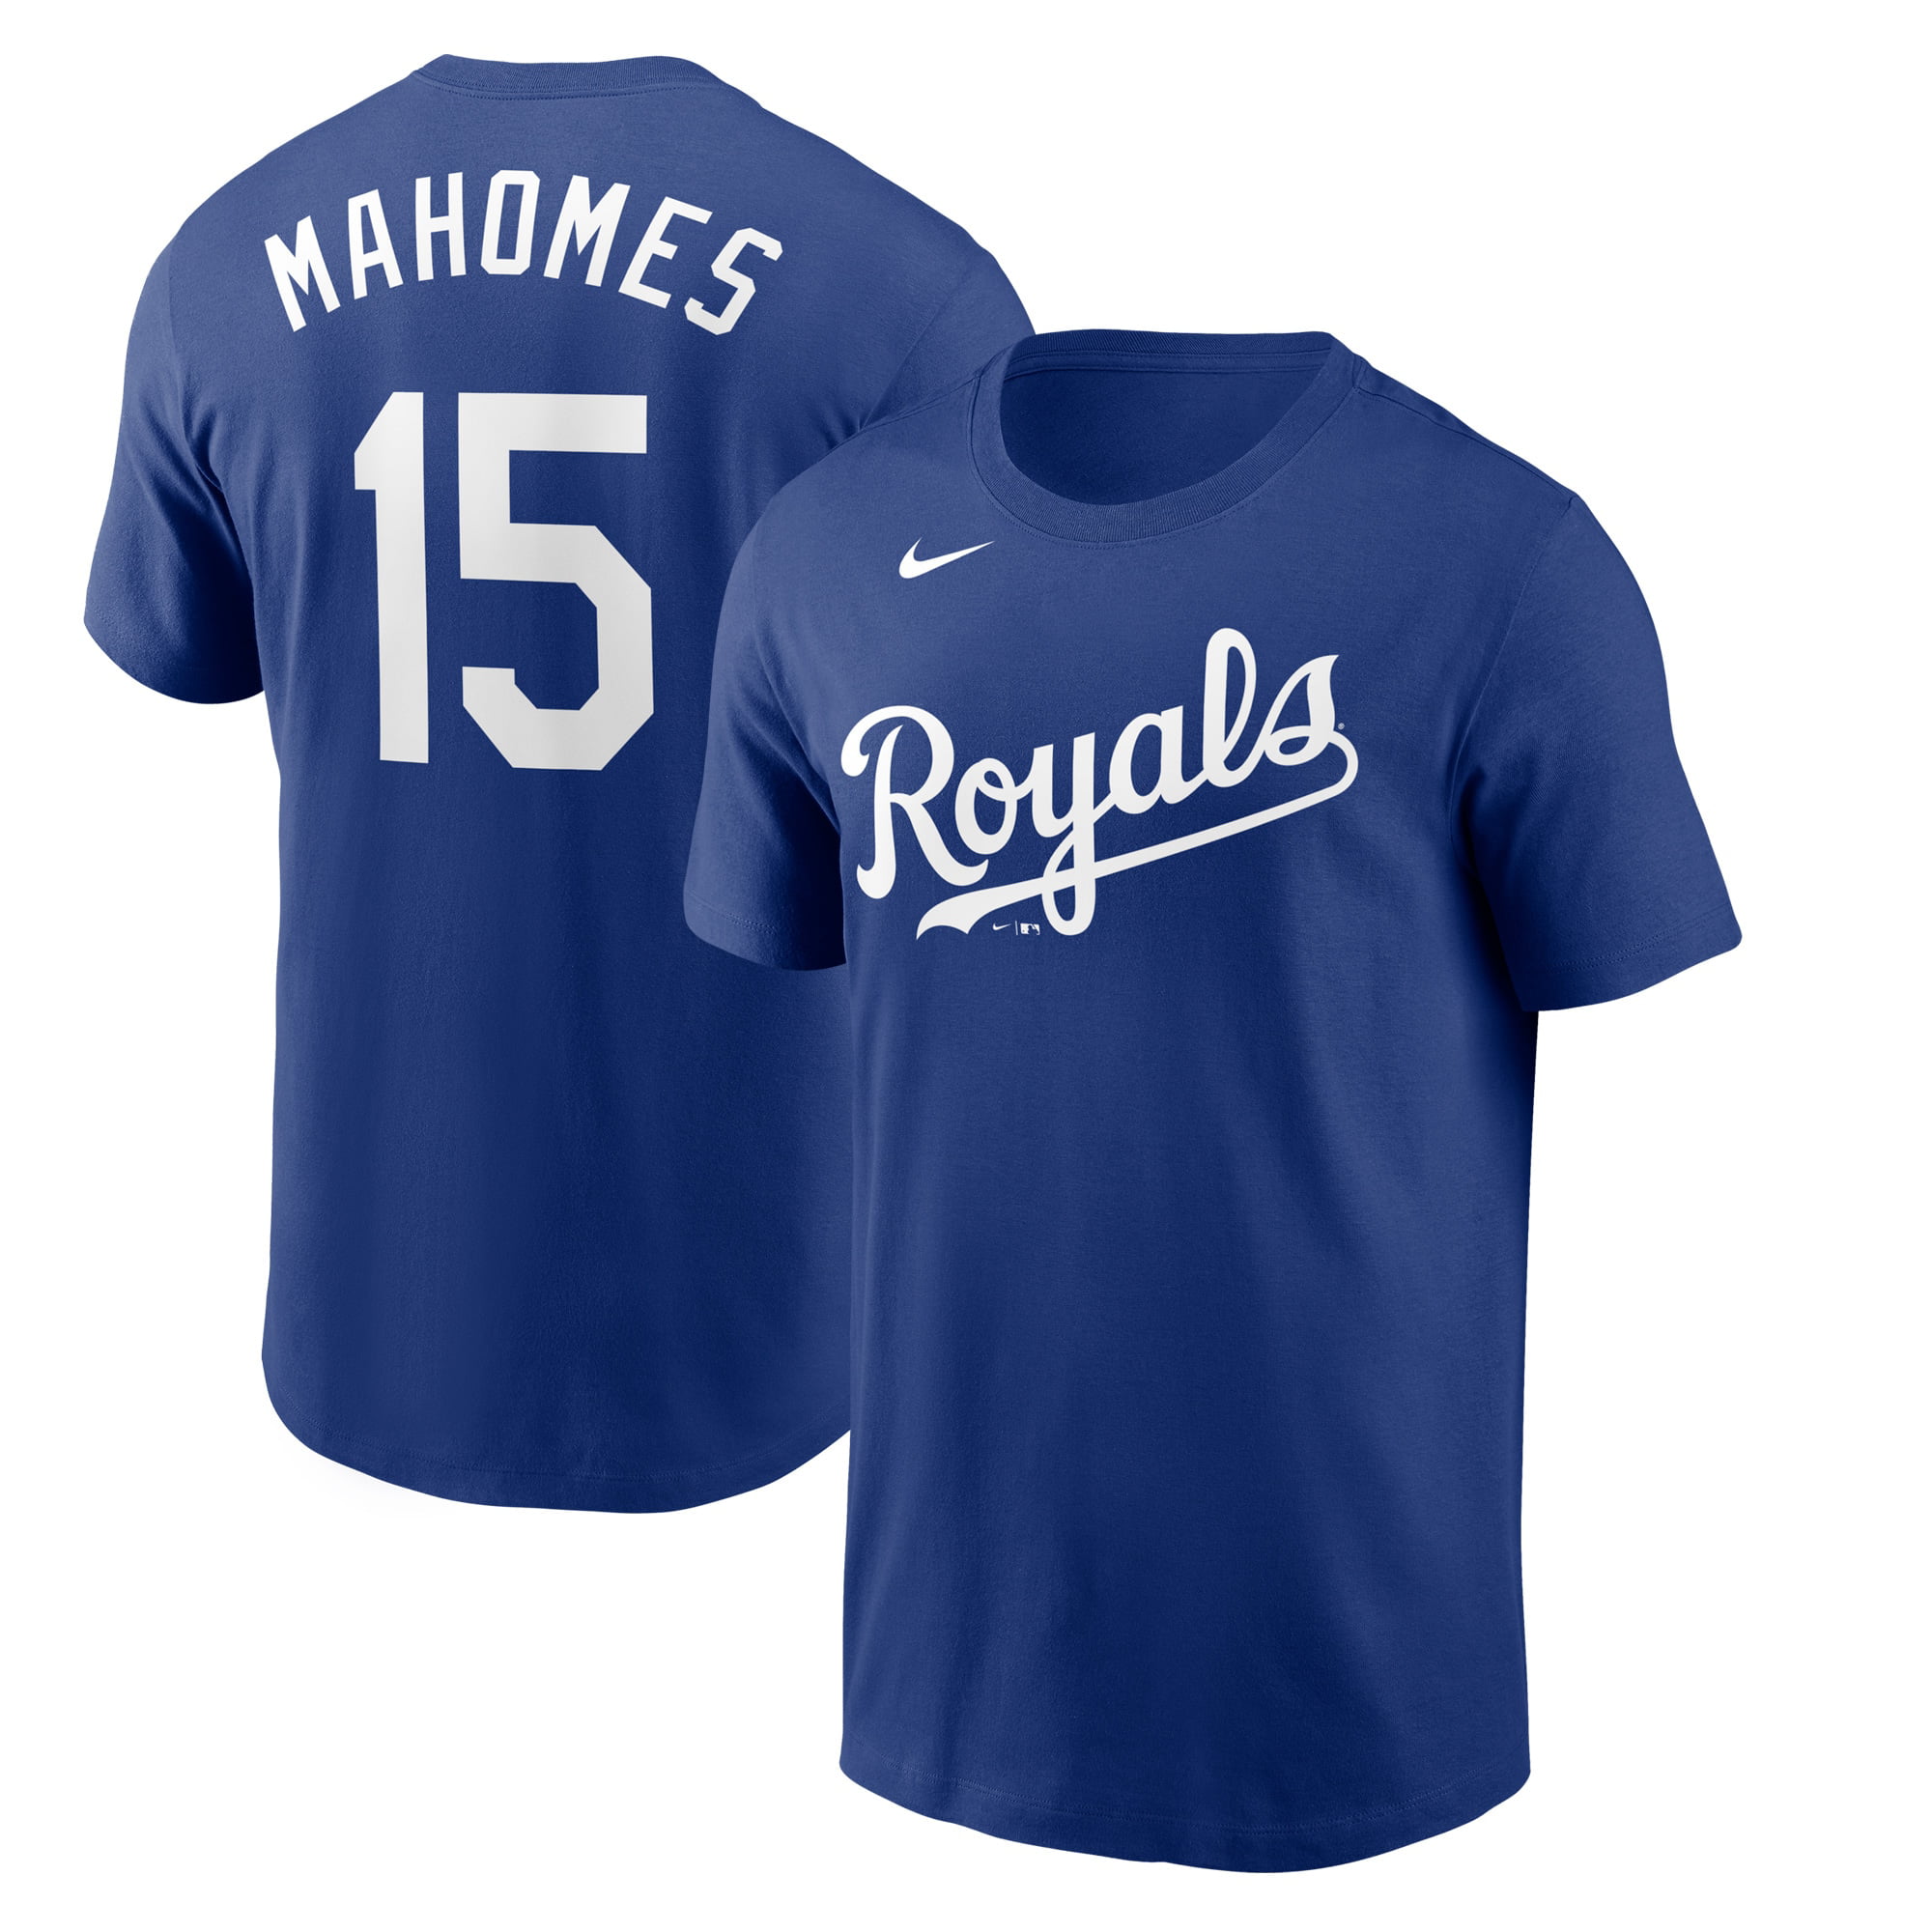 personalized royals shirt